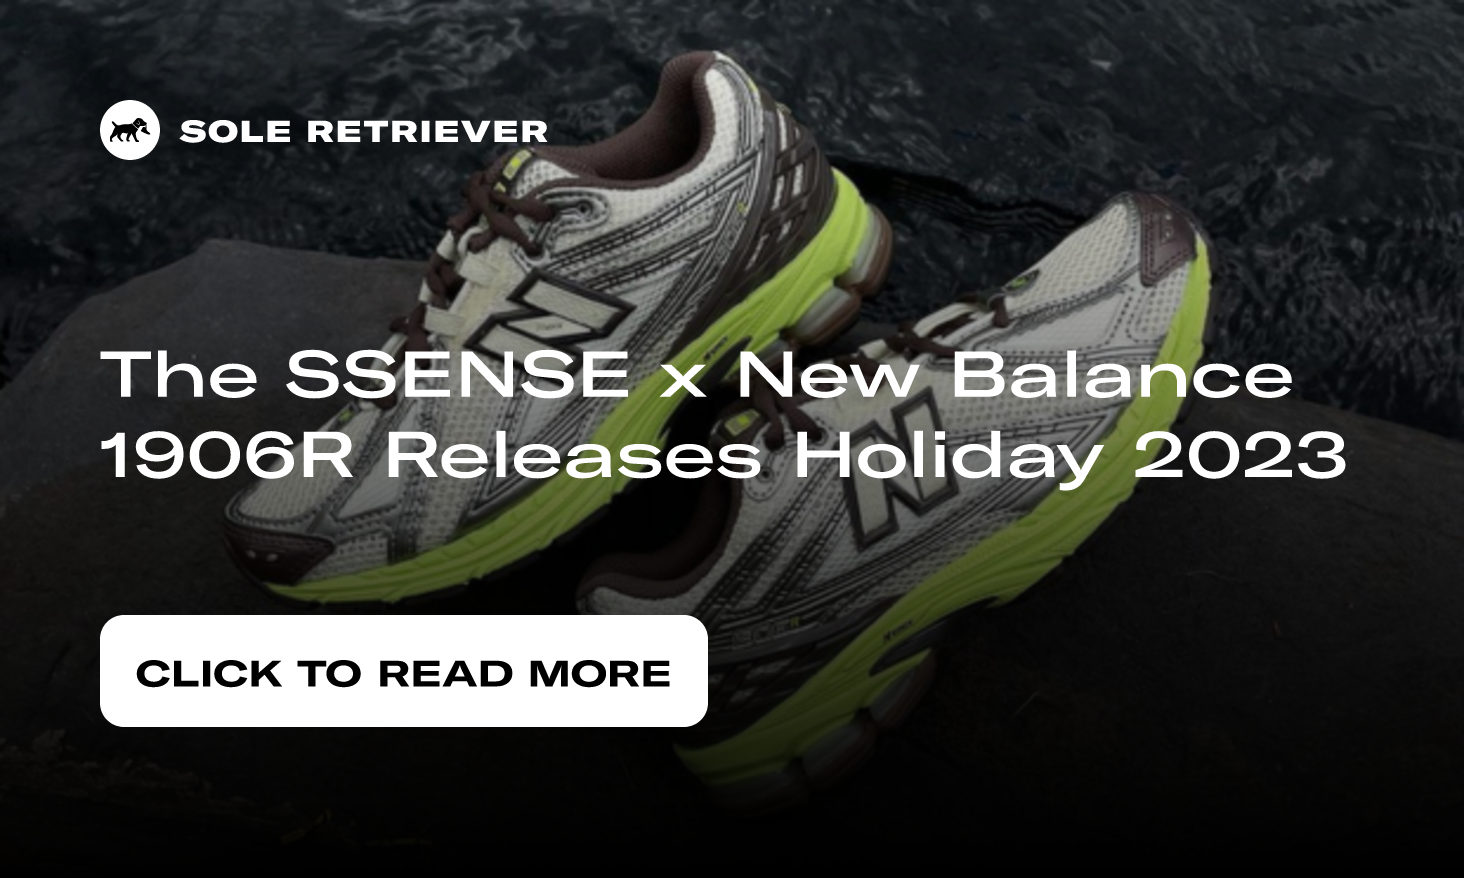 The SSENSE x New Balance 1906R Releases Holiday 2023